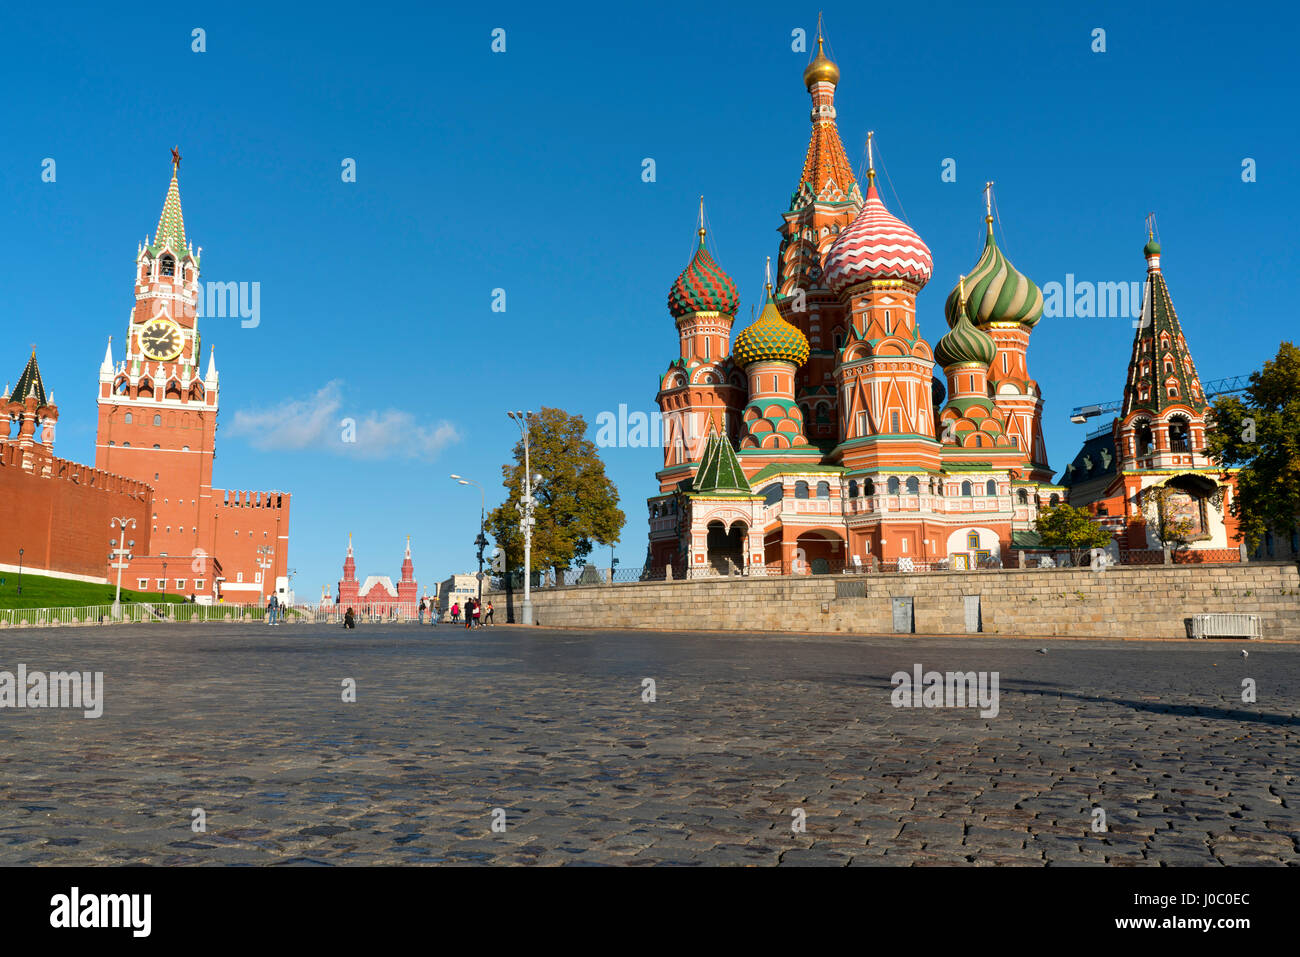 Red Square, St. Basil's Cathedral and the Saviour's Tower of the Kremlin, UNESCO World Heritage Site, Moscow, Russia Stock Photo